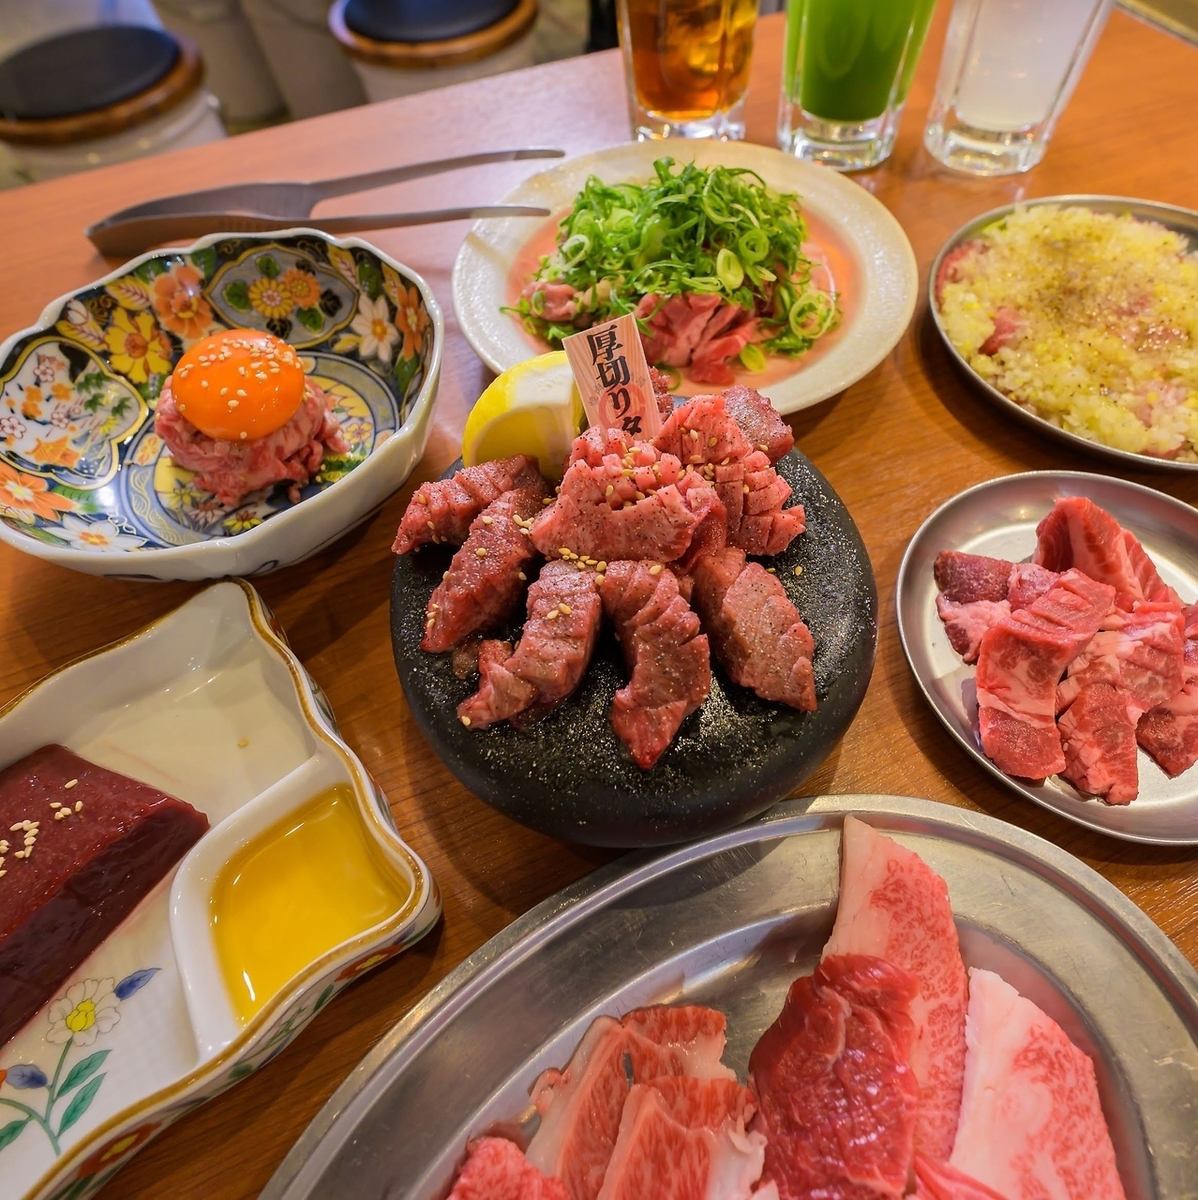 Under the theme of "Affordable, delicious", we are doing our best every day! Neo-popular yakiniku in the atmosphere of the Showa period.